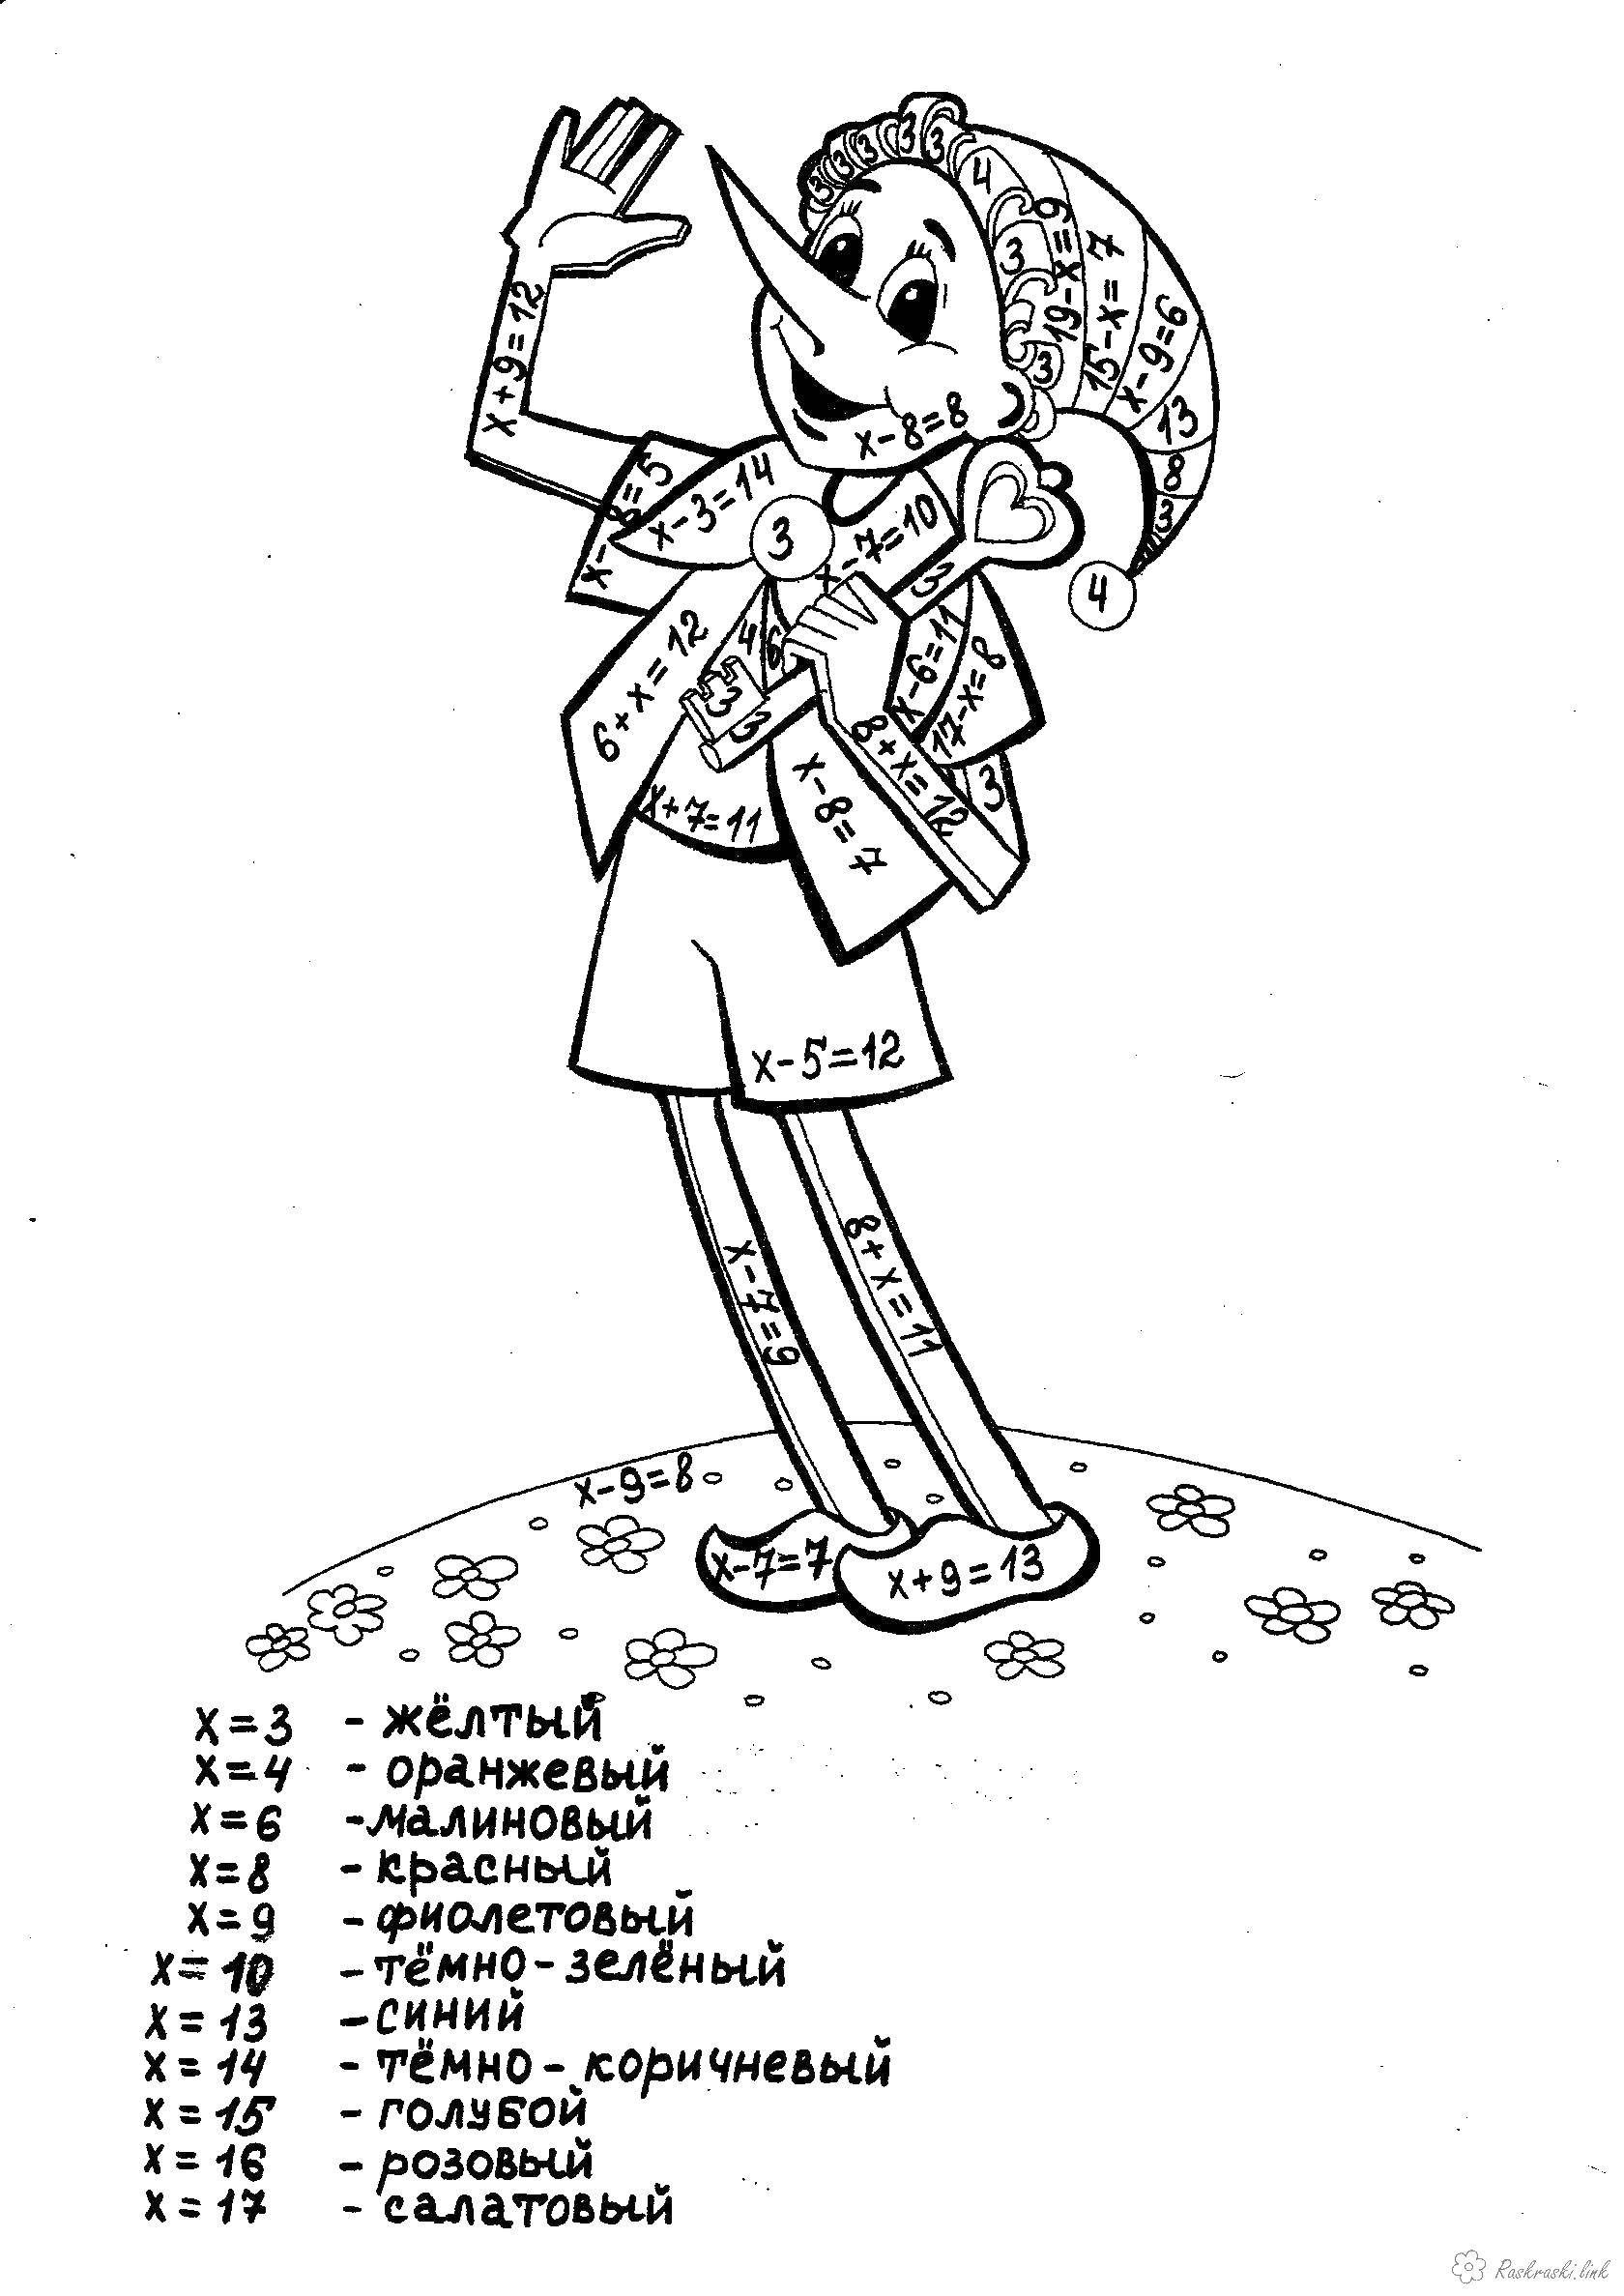 Coloring Solve the equations and color Pinocchio. Category mathematical coloring pages. Tags:  Math, counting, logic.